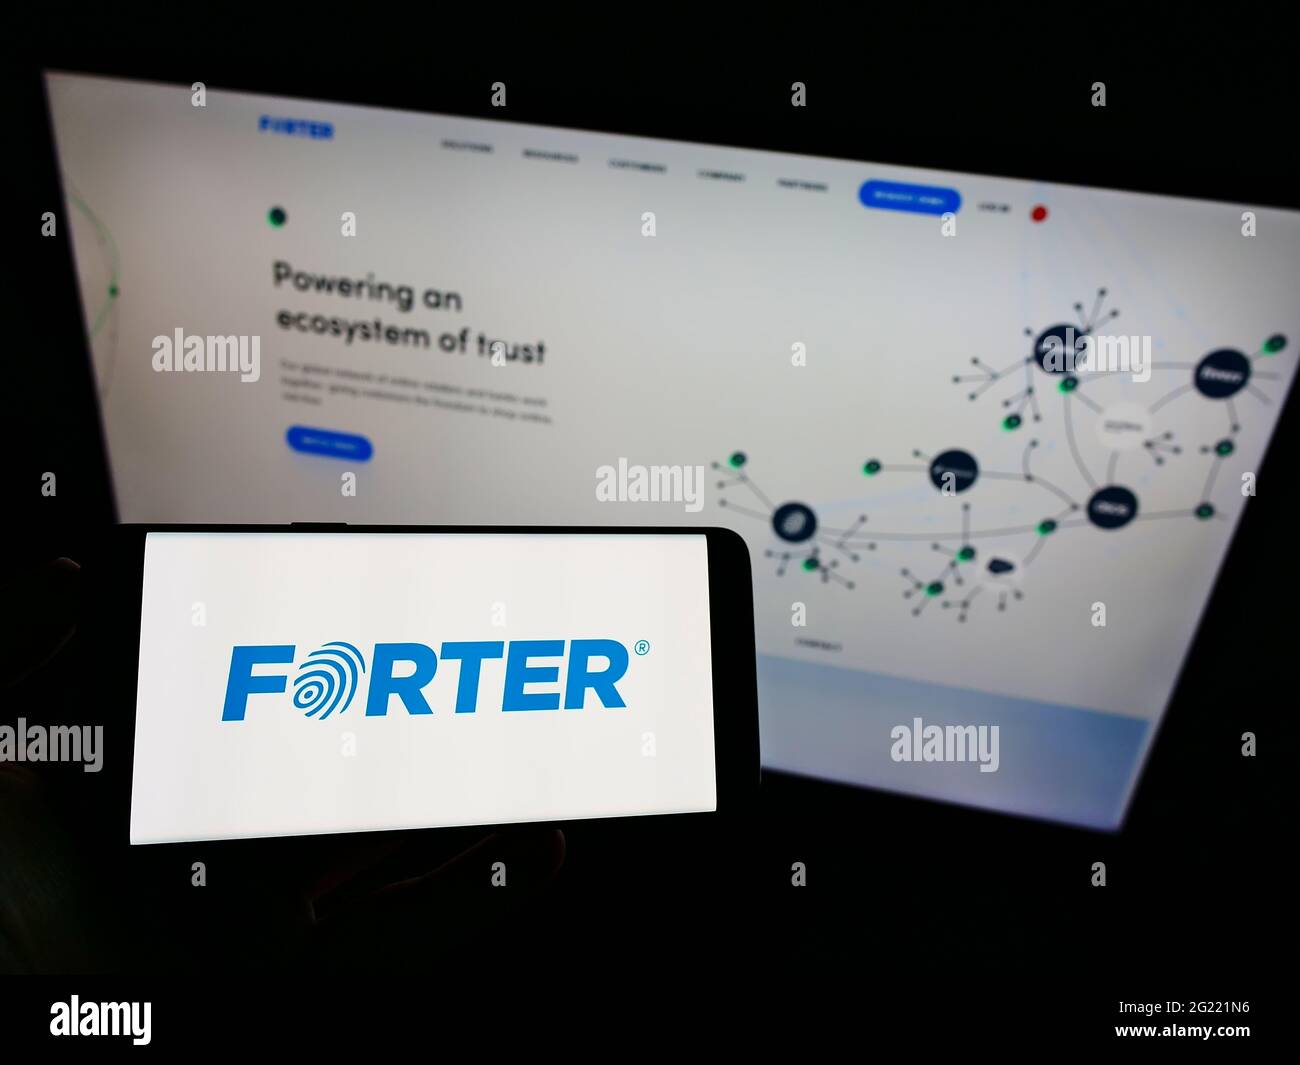 Person holding smartphone with logo of fraud prevention software company Forter Inc. on screen in front of website. Focus on phone display. Stock Photo